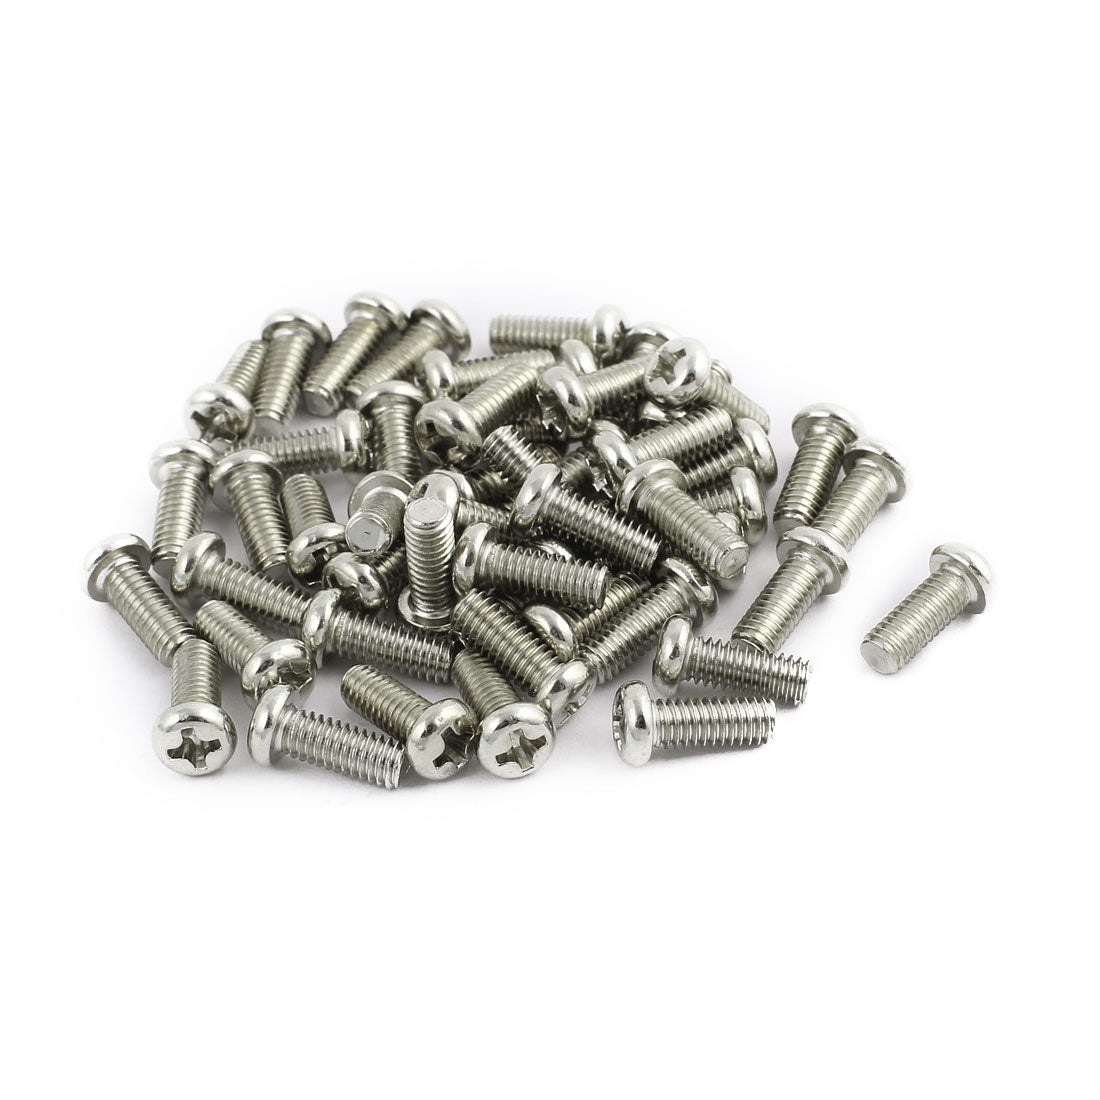 uxcell Uxcell 50pcs M4x9mm Stainless Steel Pan Head Phillips Machine Screws Bolts